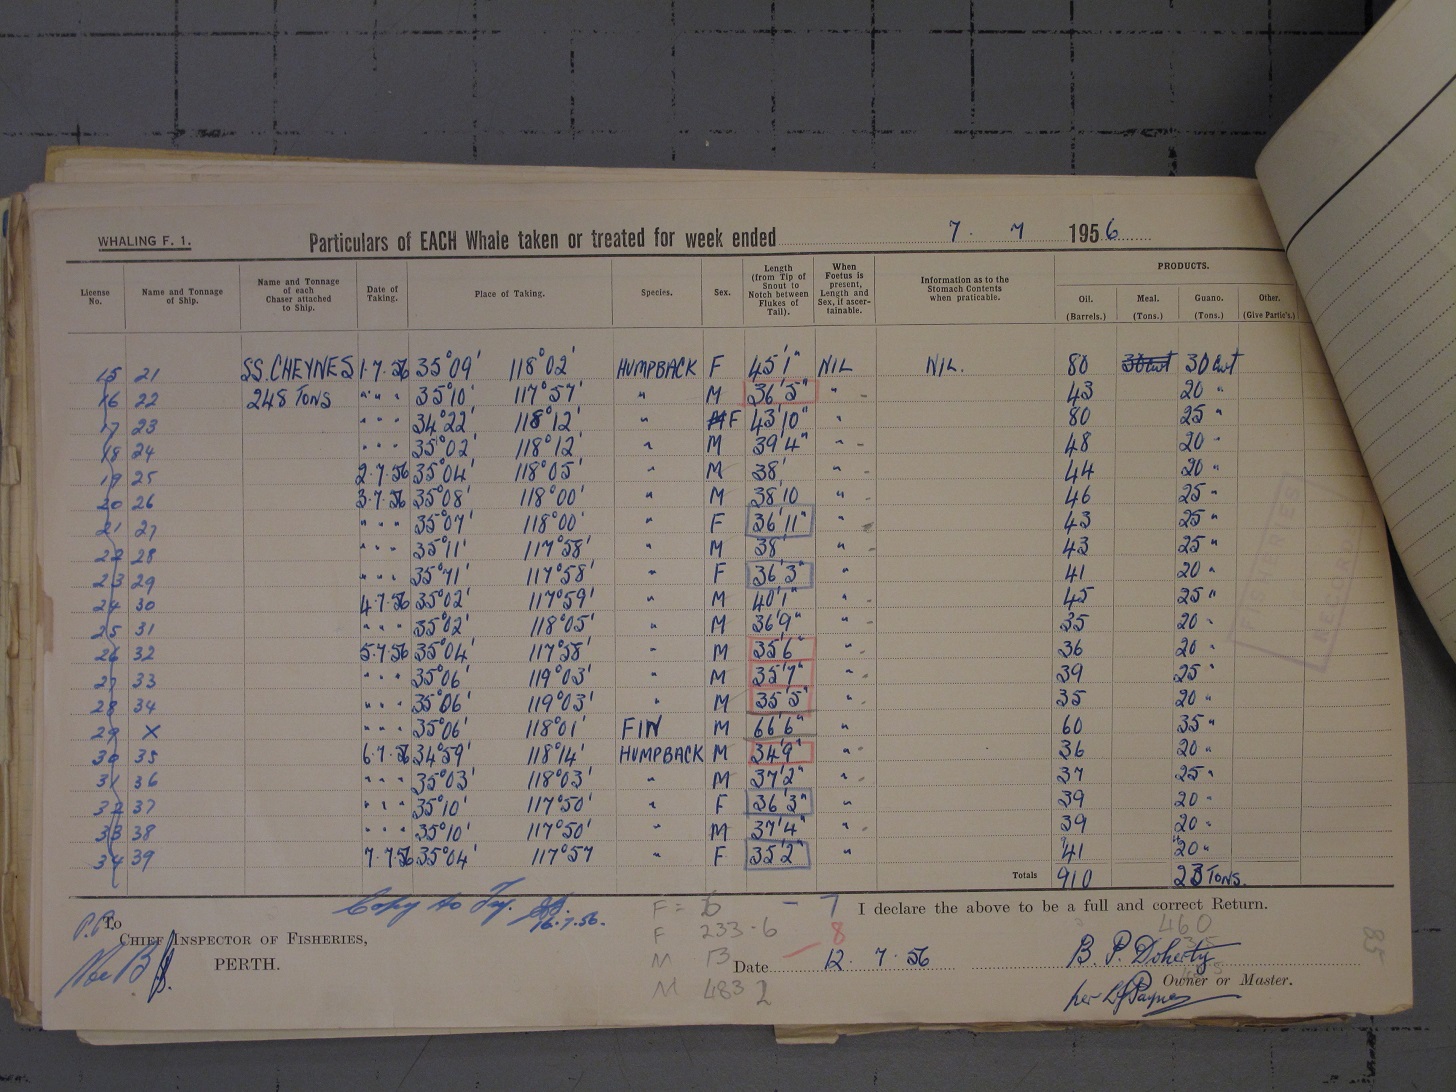 Cheynes Beach whaling station record from 1956